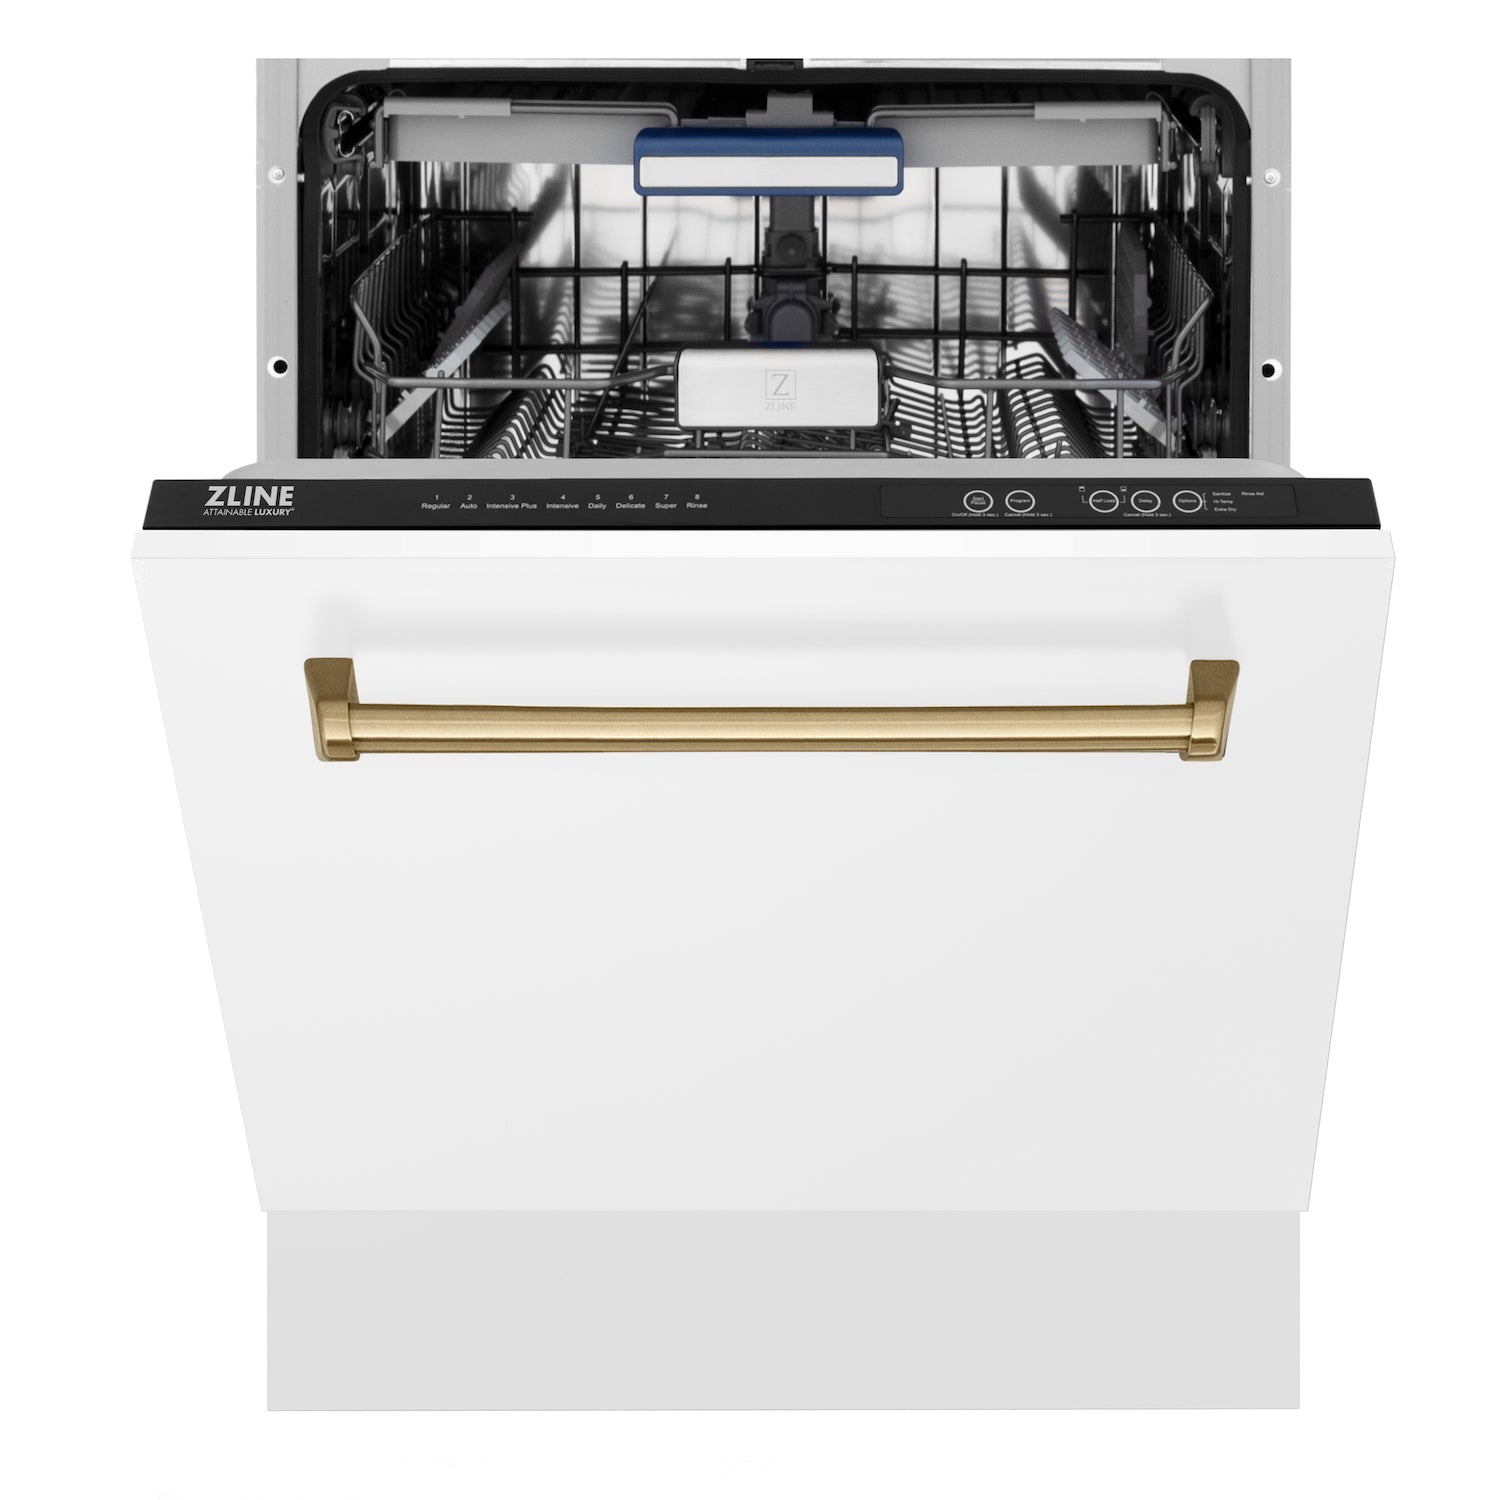 ZLINE Autograph Edition 24 in. Tallac Series 3rd Rack Top Control Built-In Tall Tub Dishwasher in White Matte with Champagne Bronze Handle, 51dBa (DWVZ-WM-24-CB) front, half open.